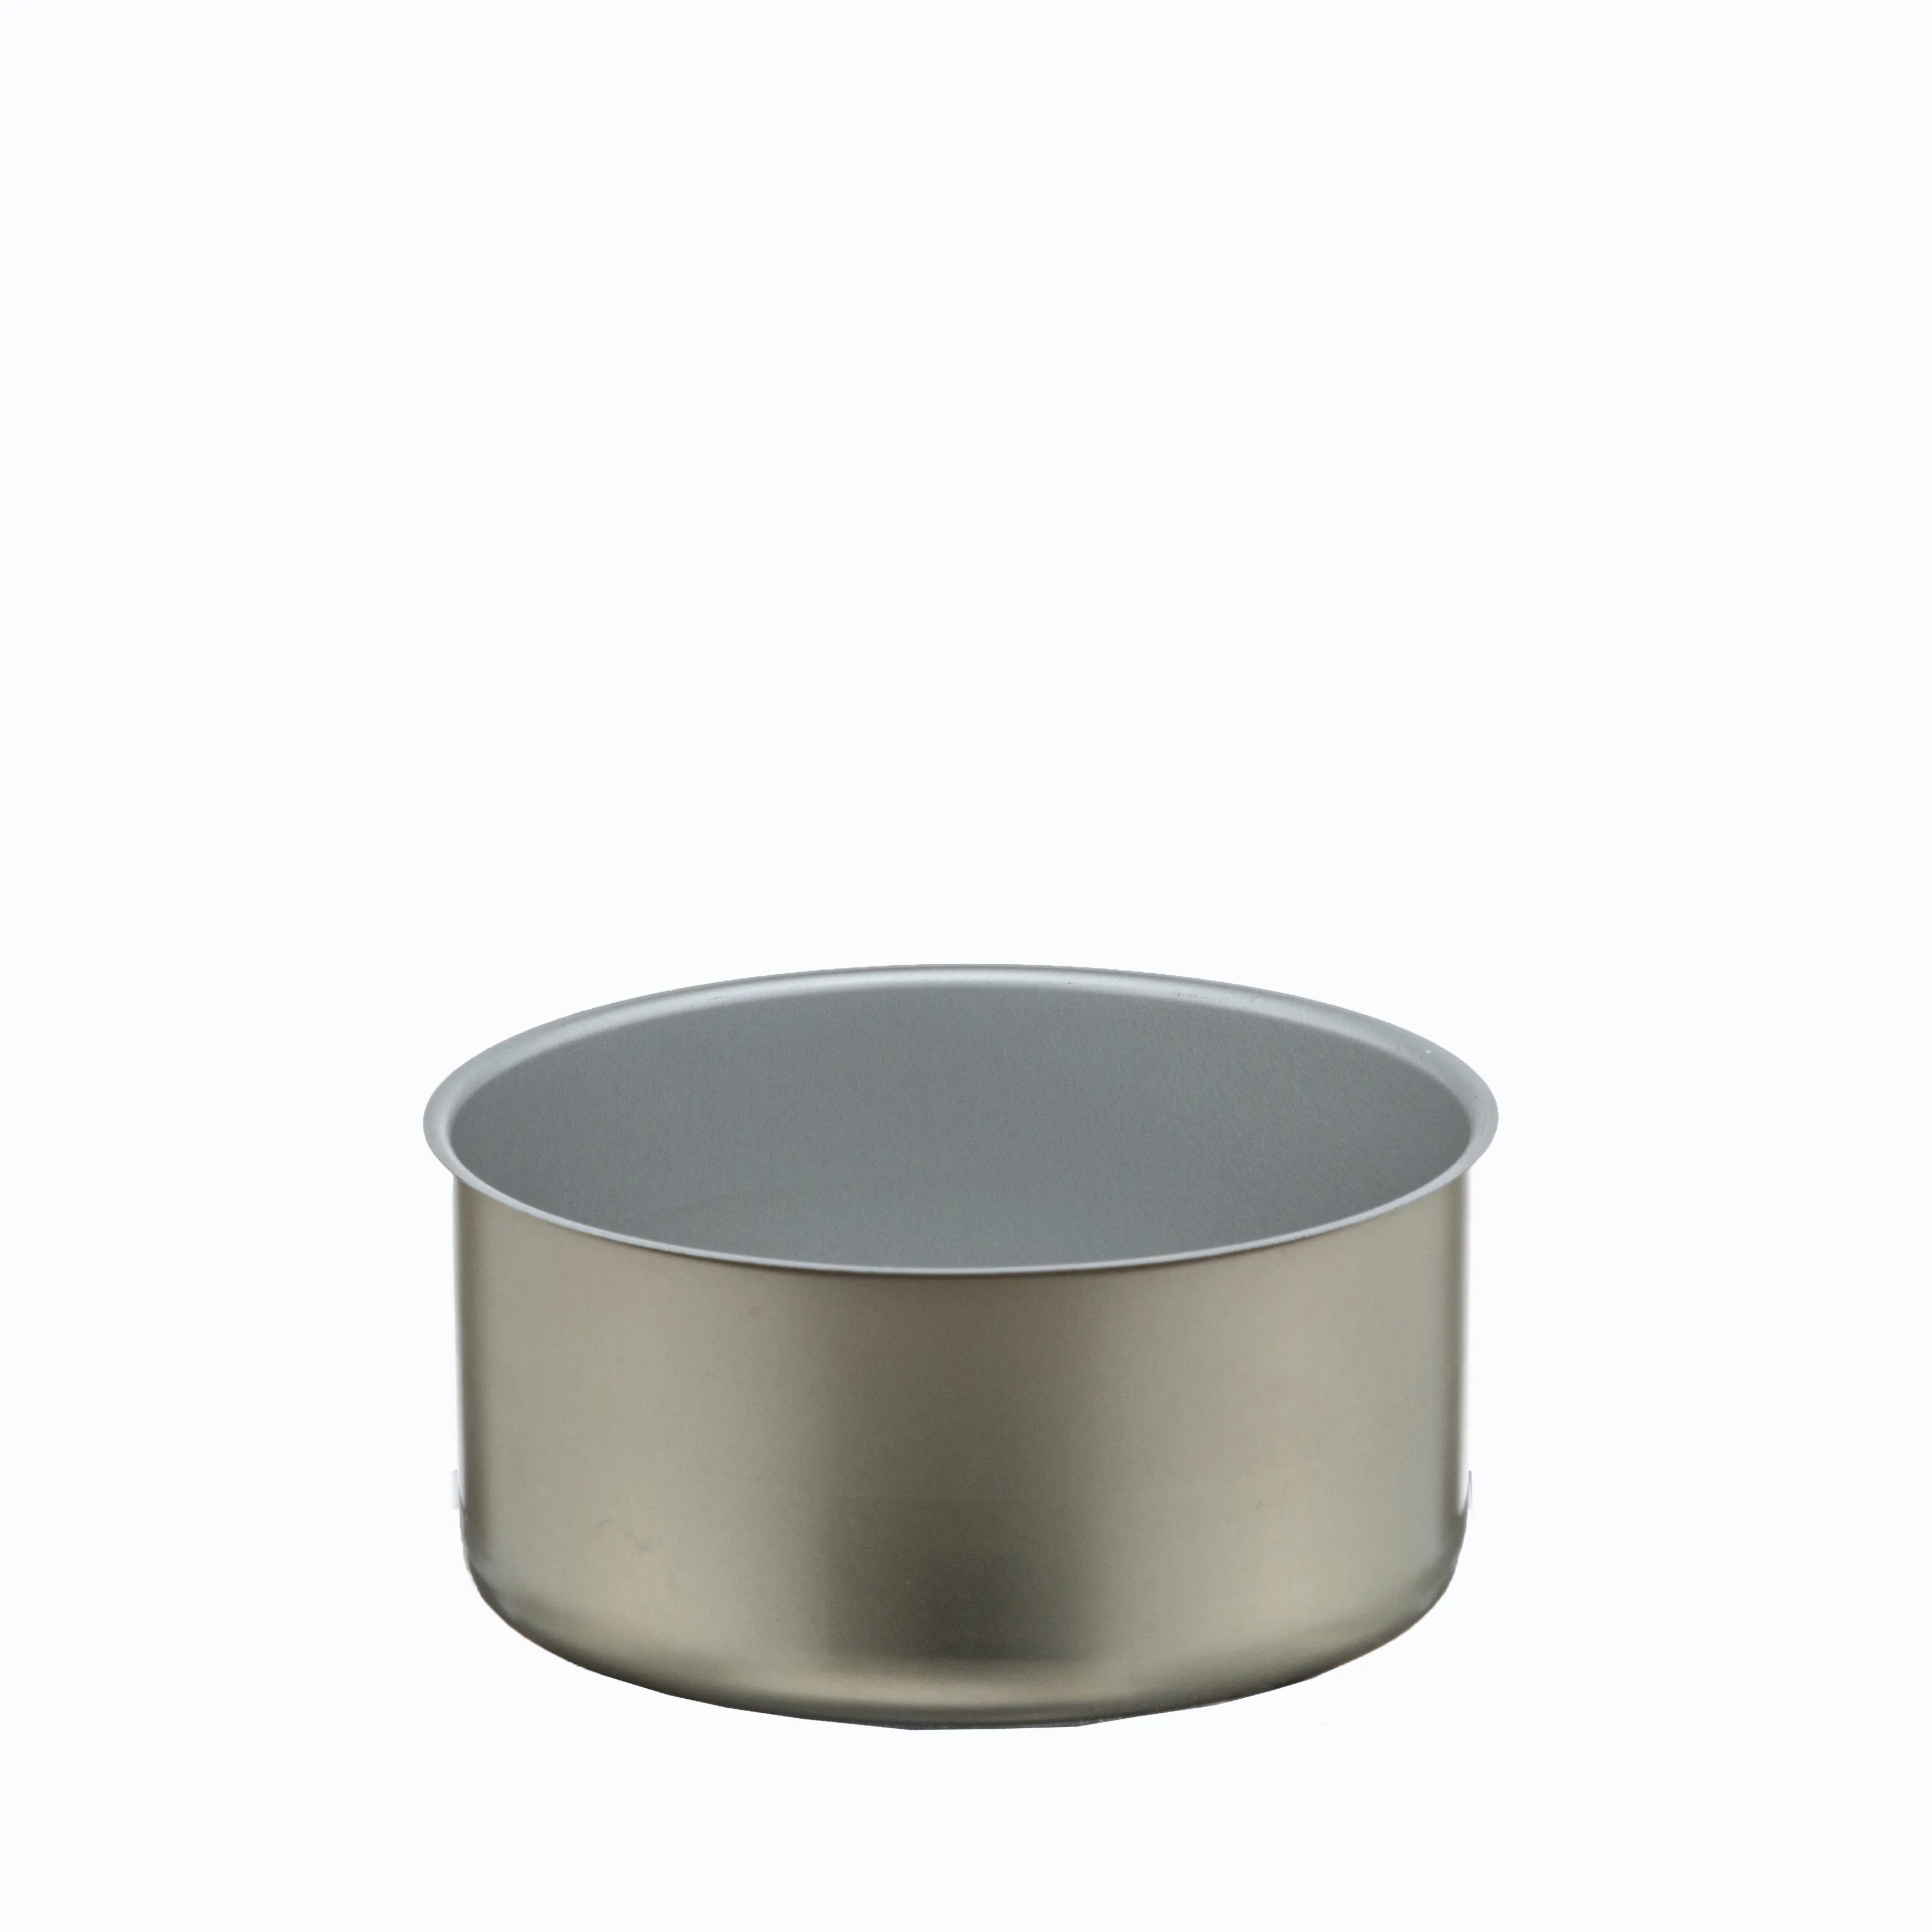 829# Hot Sale Food Grade Tuna Fish Metal Tin Can Empty Food Can Packaging with Easy Open Lid